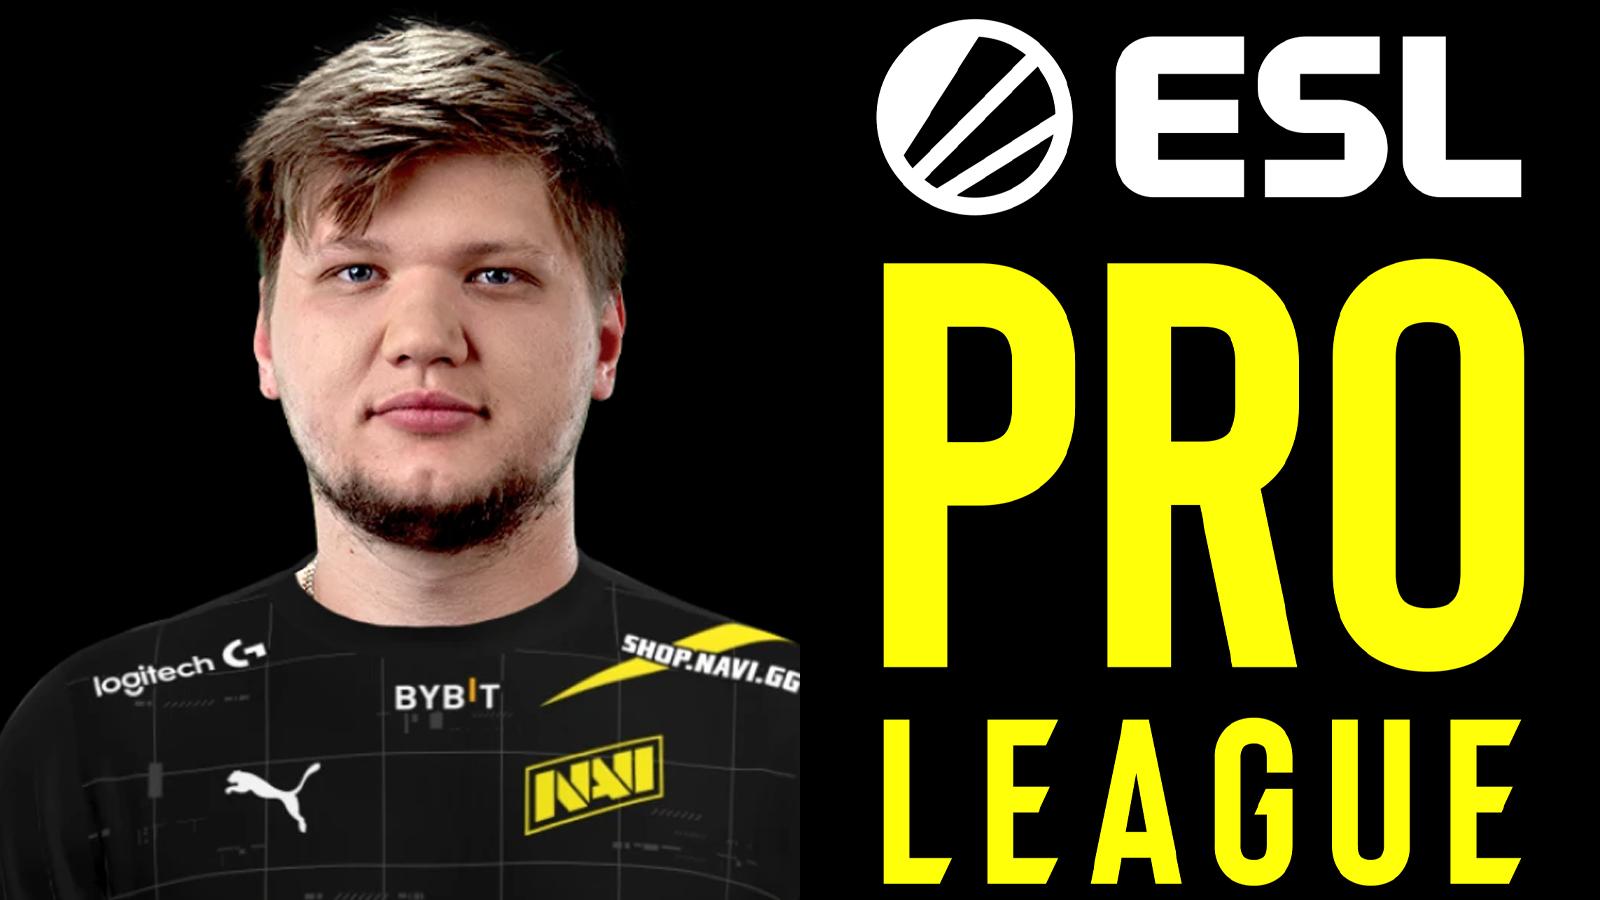 An image of s1mple and ESL pro league